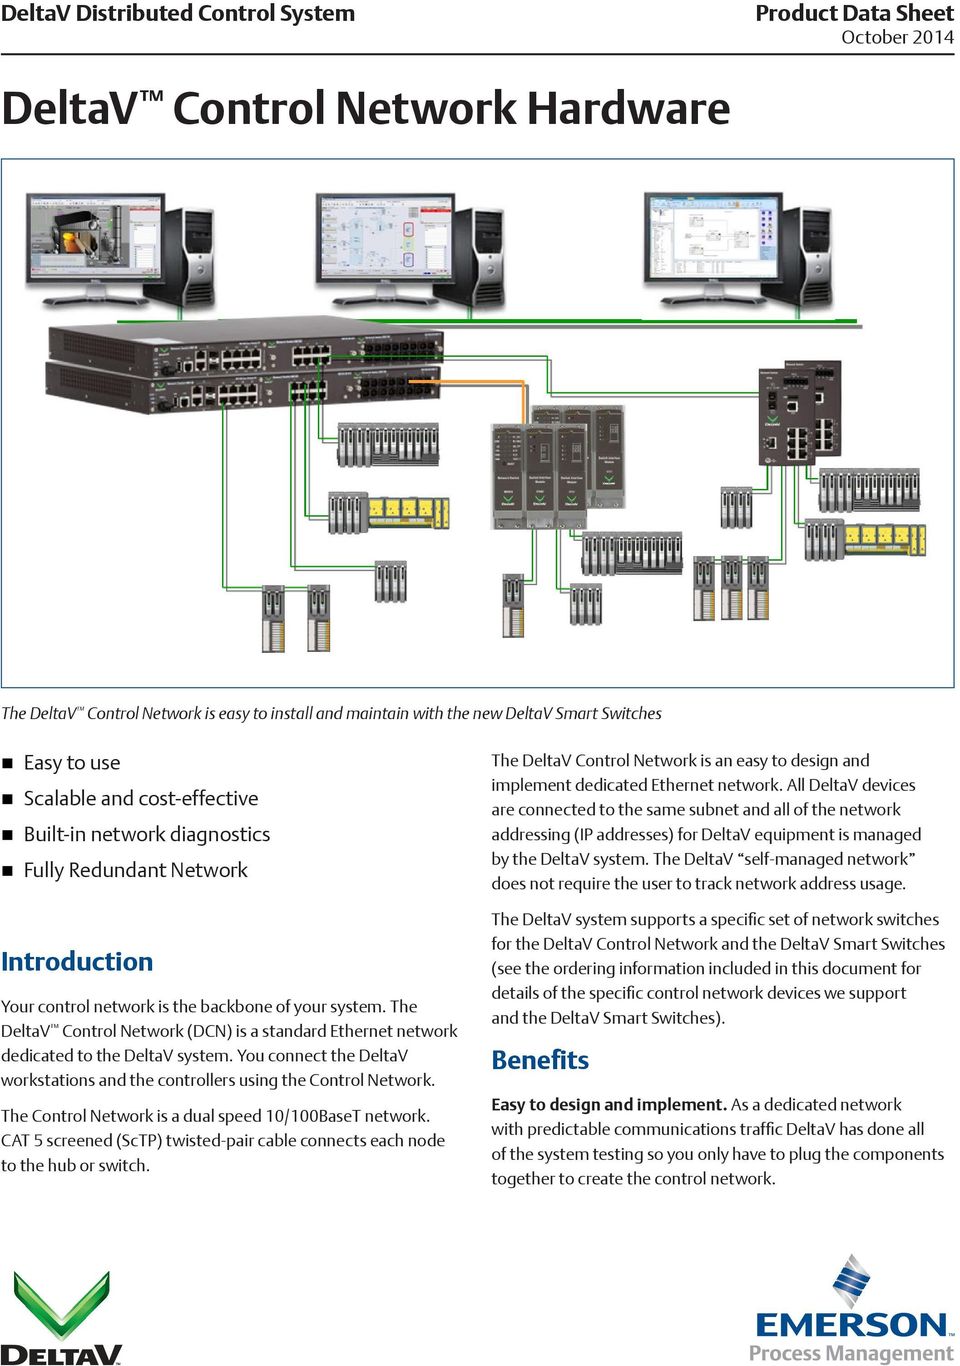 The DeltaV Control Network (DCN) is a standard Ethernet network dedicated to the DeltaV system. You connect the DeltaV workstations and the controllers using the Control Network.